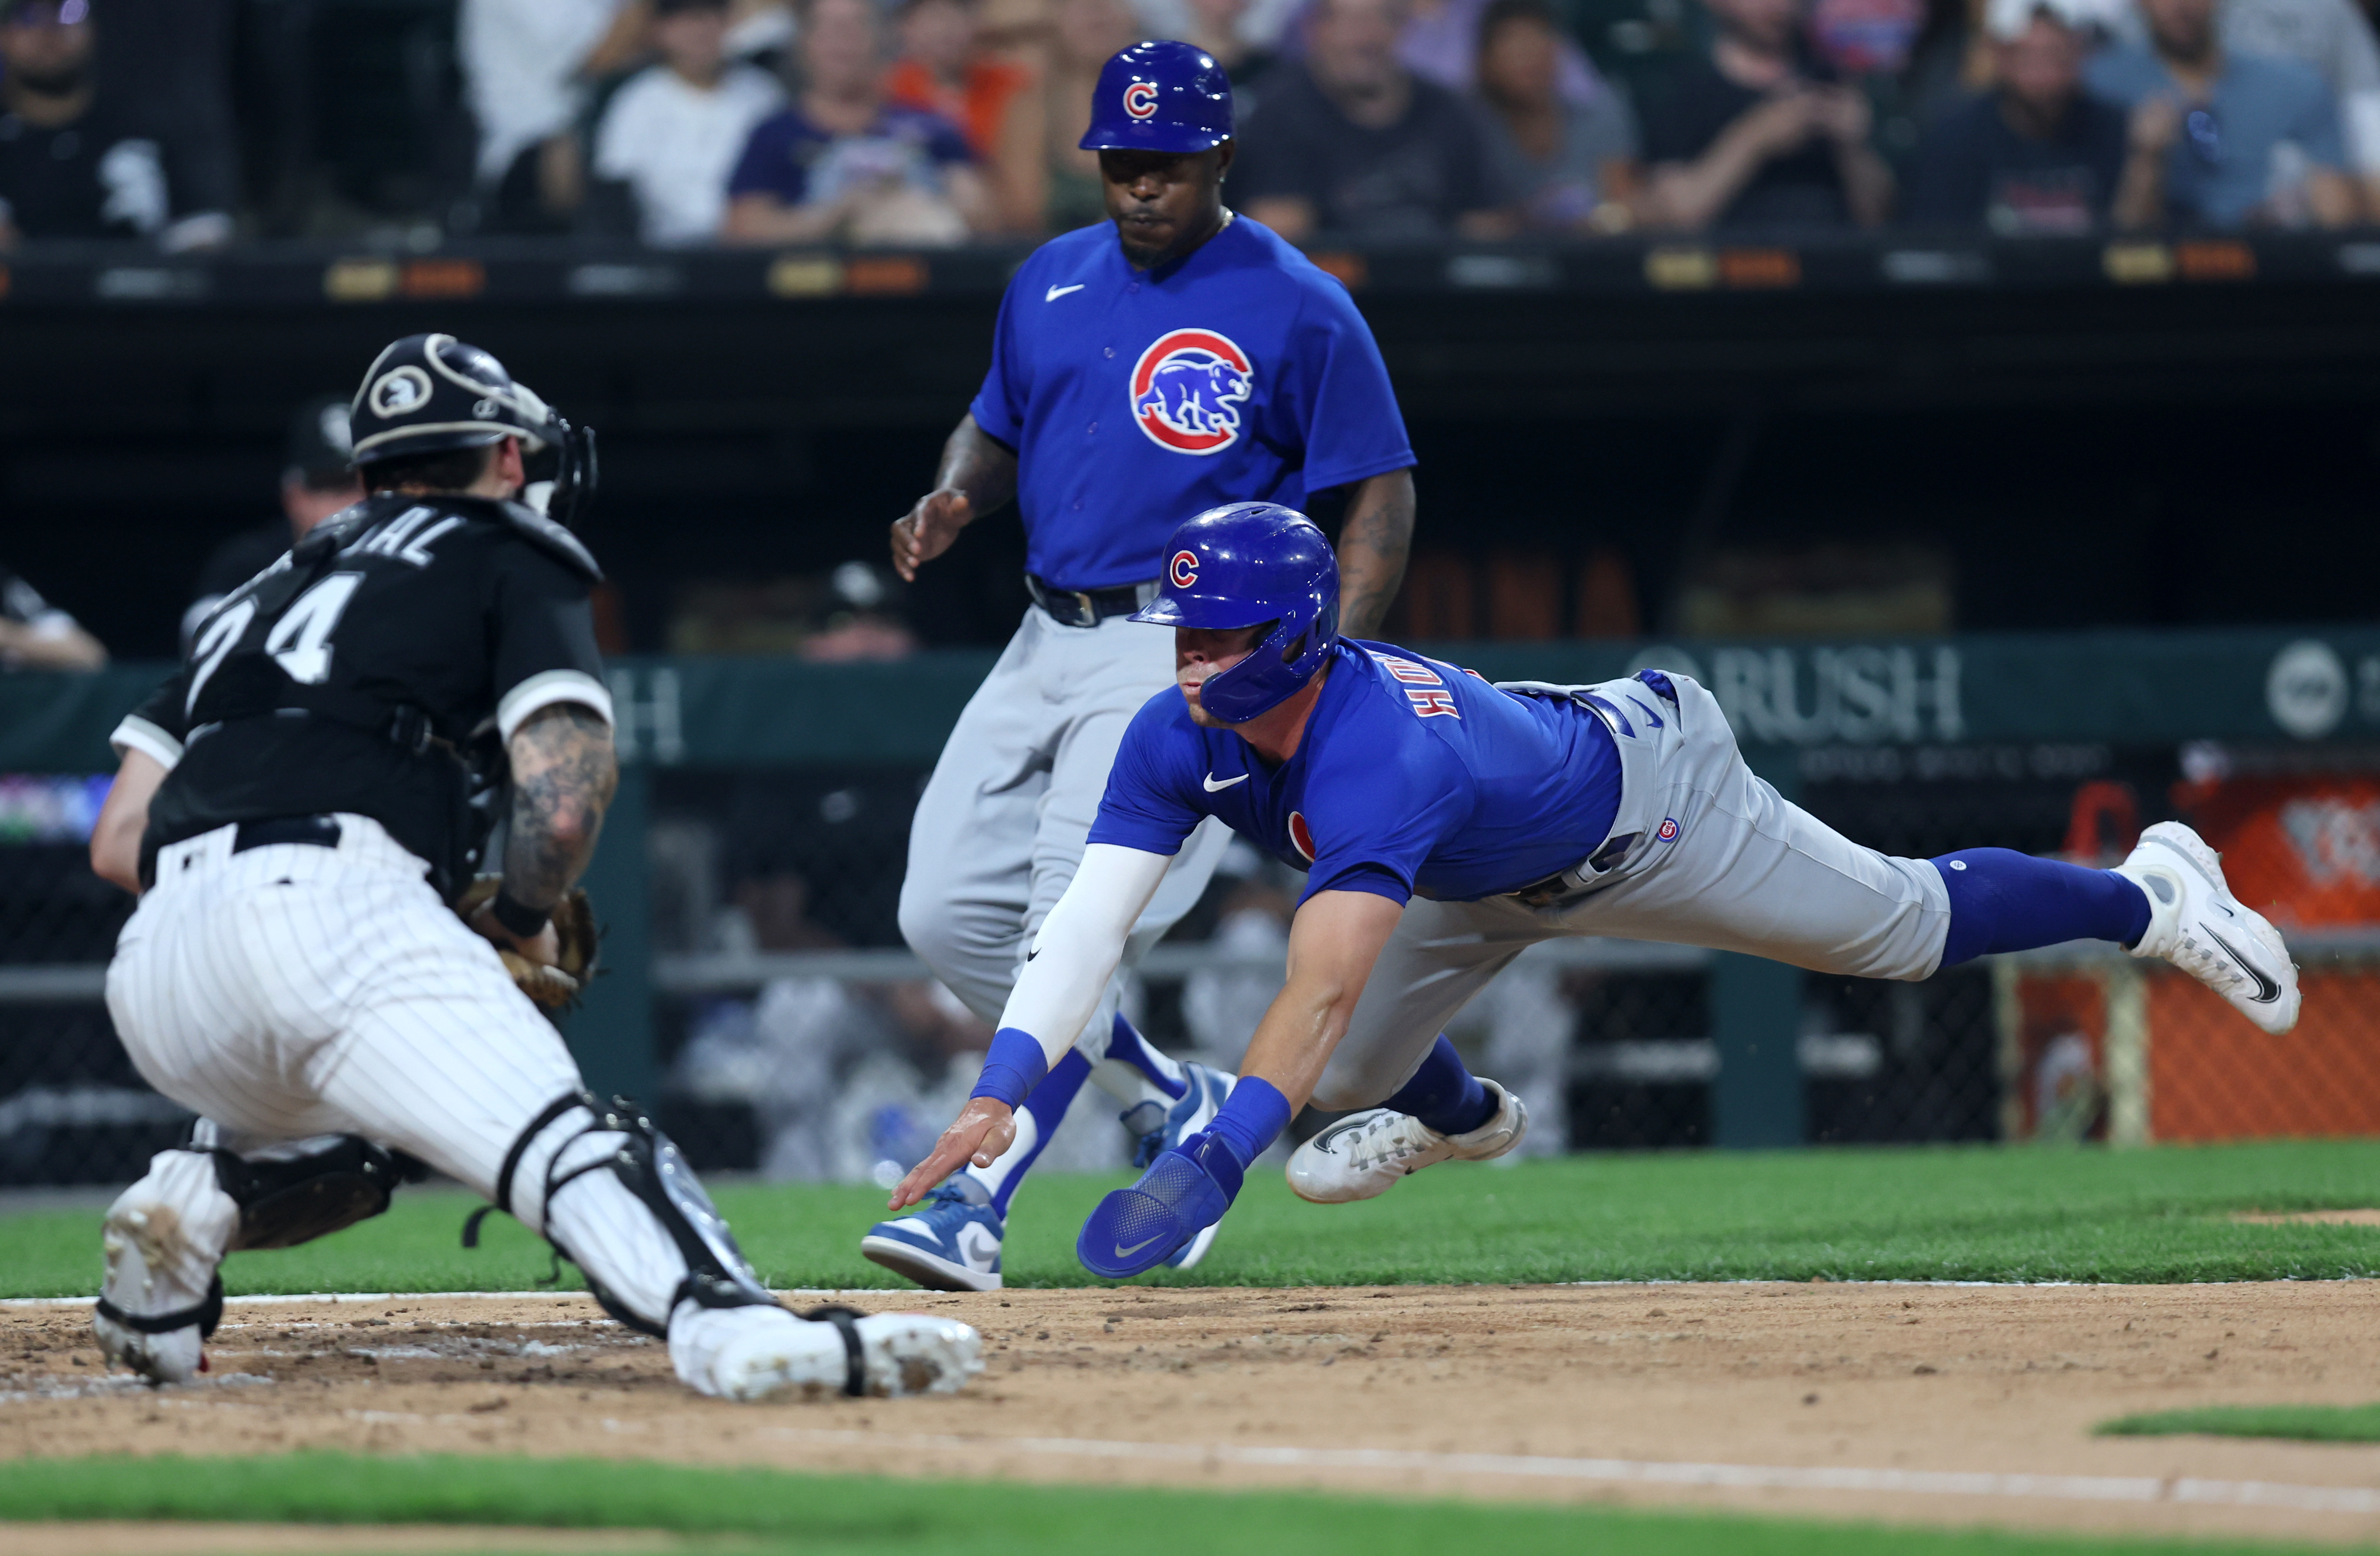 Chicago Cubs hit 4 home runs in City Series victory over White Sox